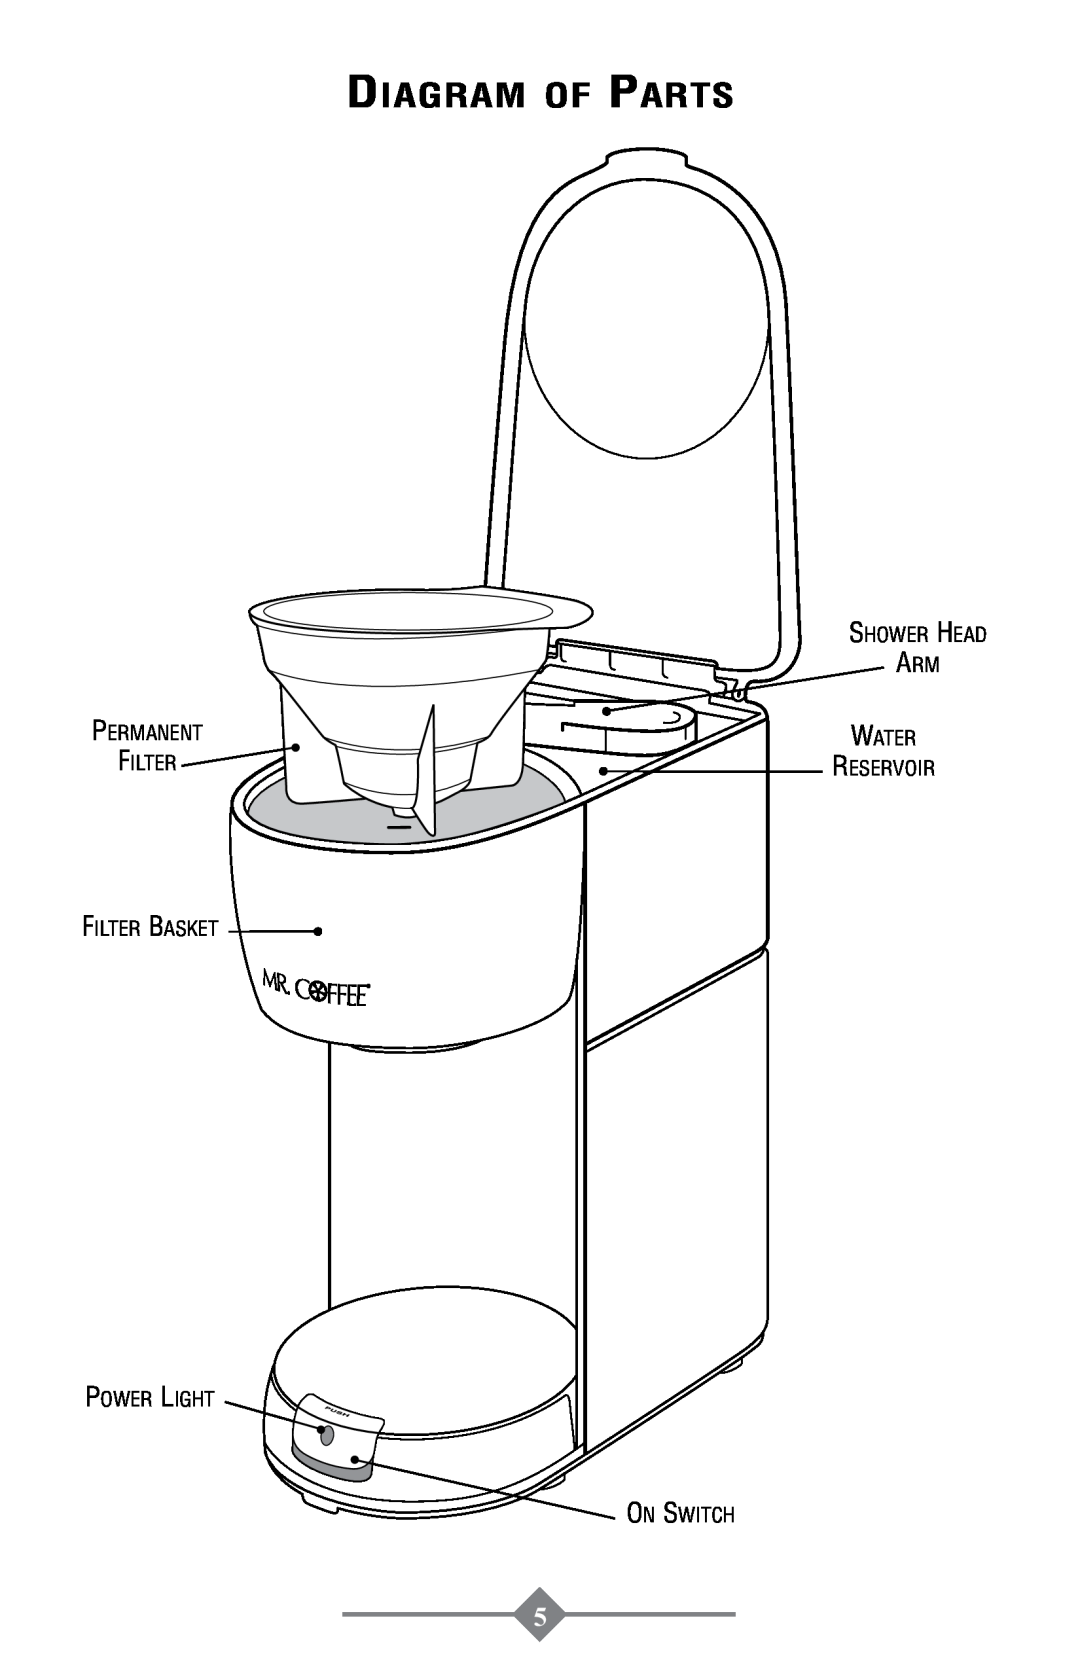 Mr. Coffee PTC13-100 instruction manual Diagram of Parts, Shower Head Arm, Permanent, Water, Filter, Reservoir 